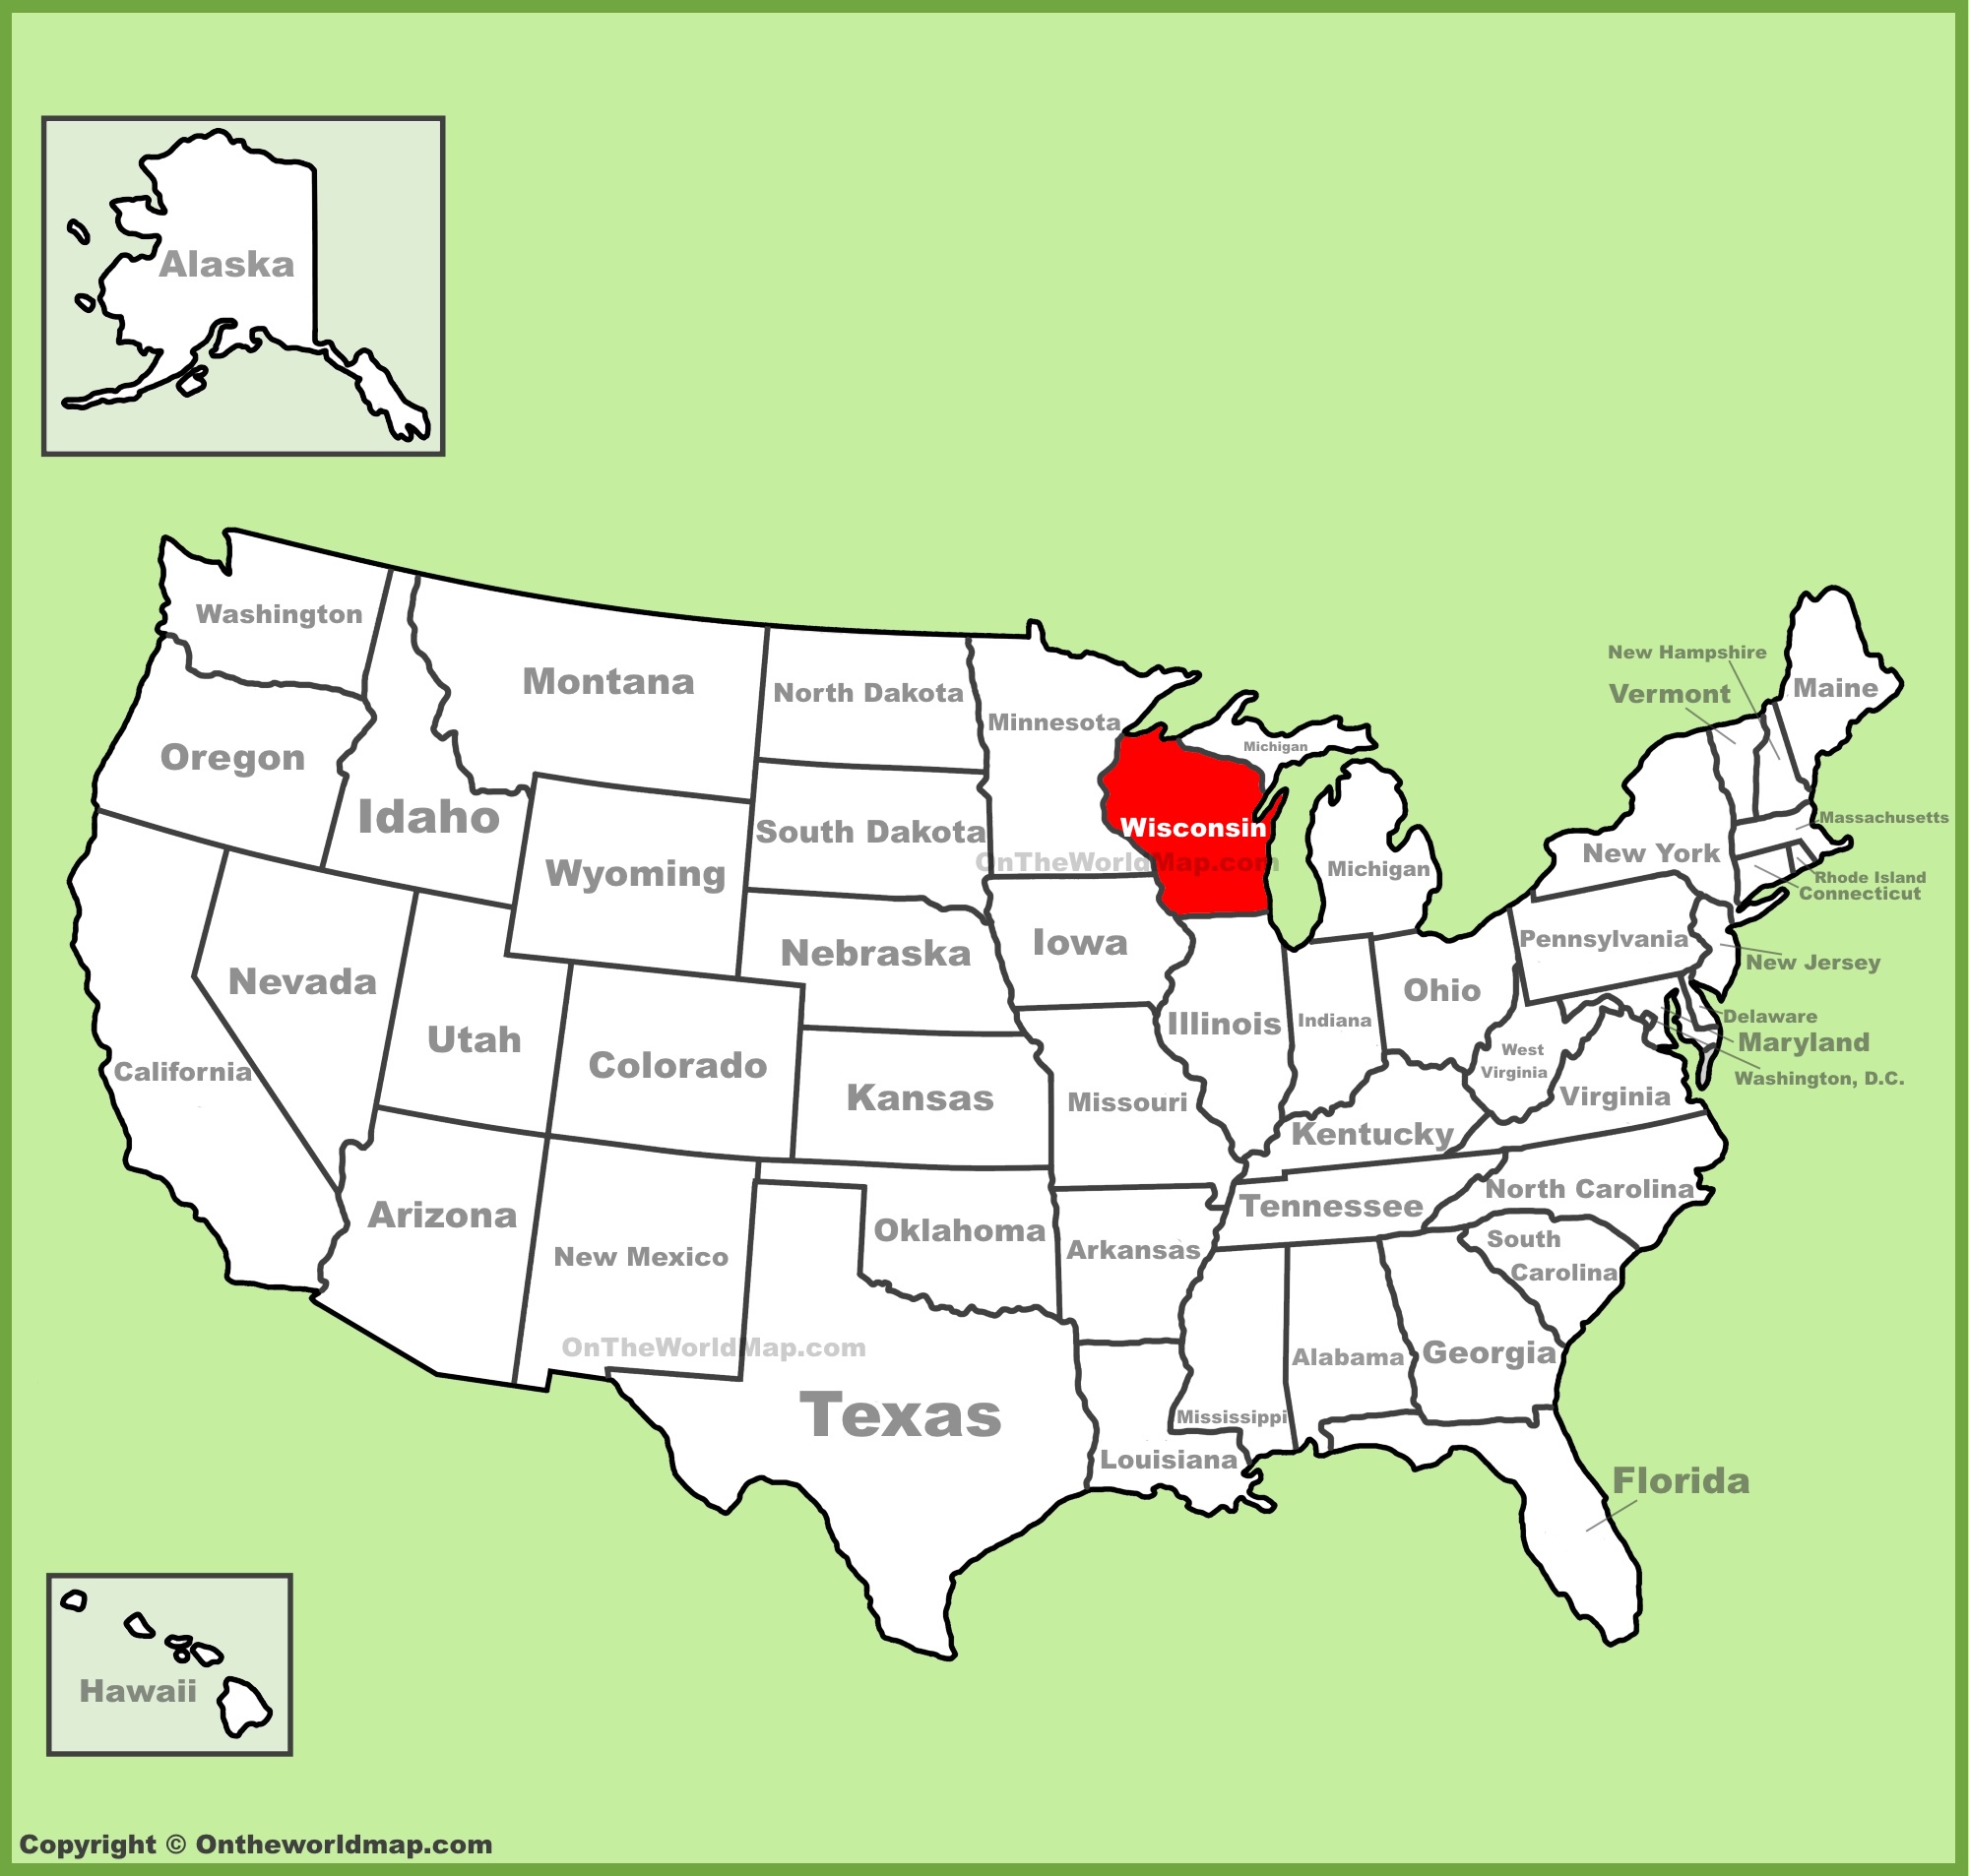 Image result for map of the US wisconsin